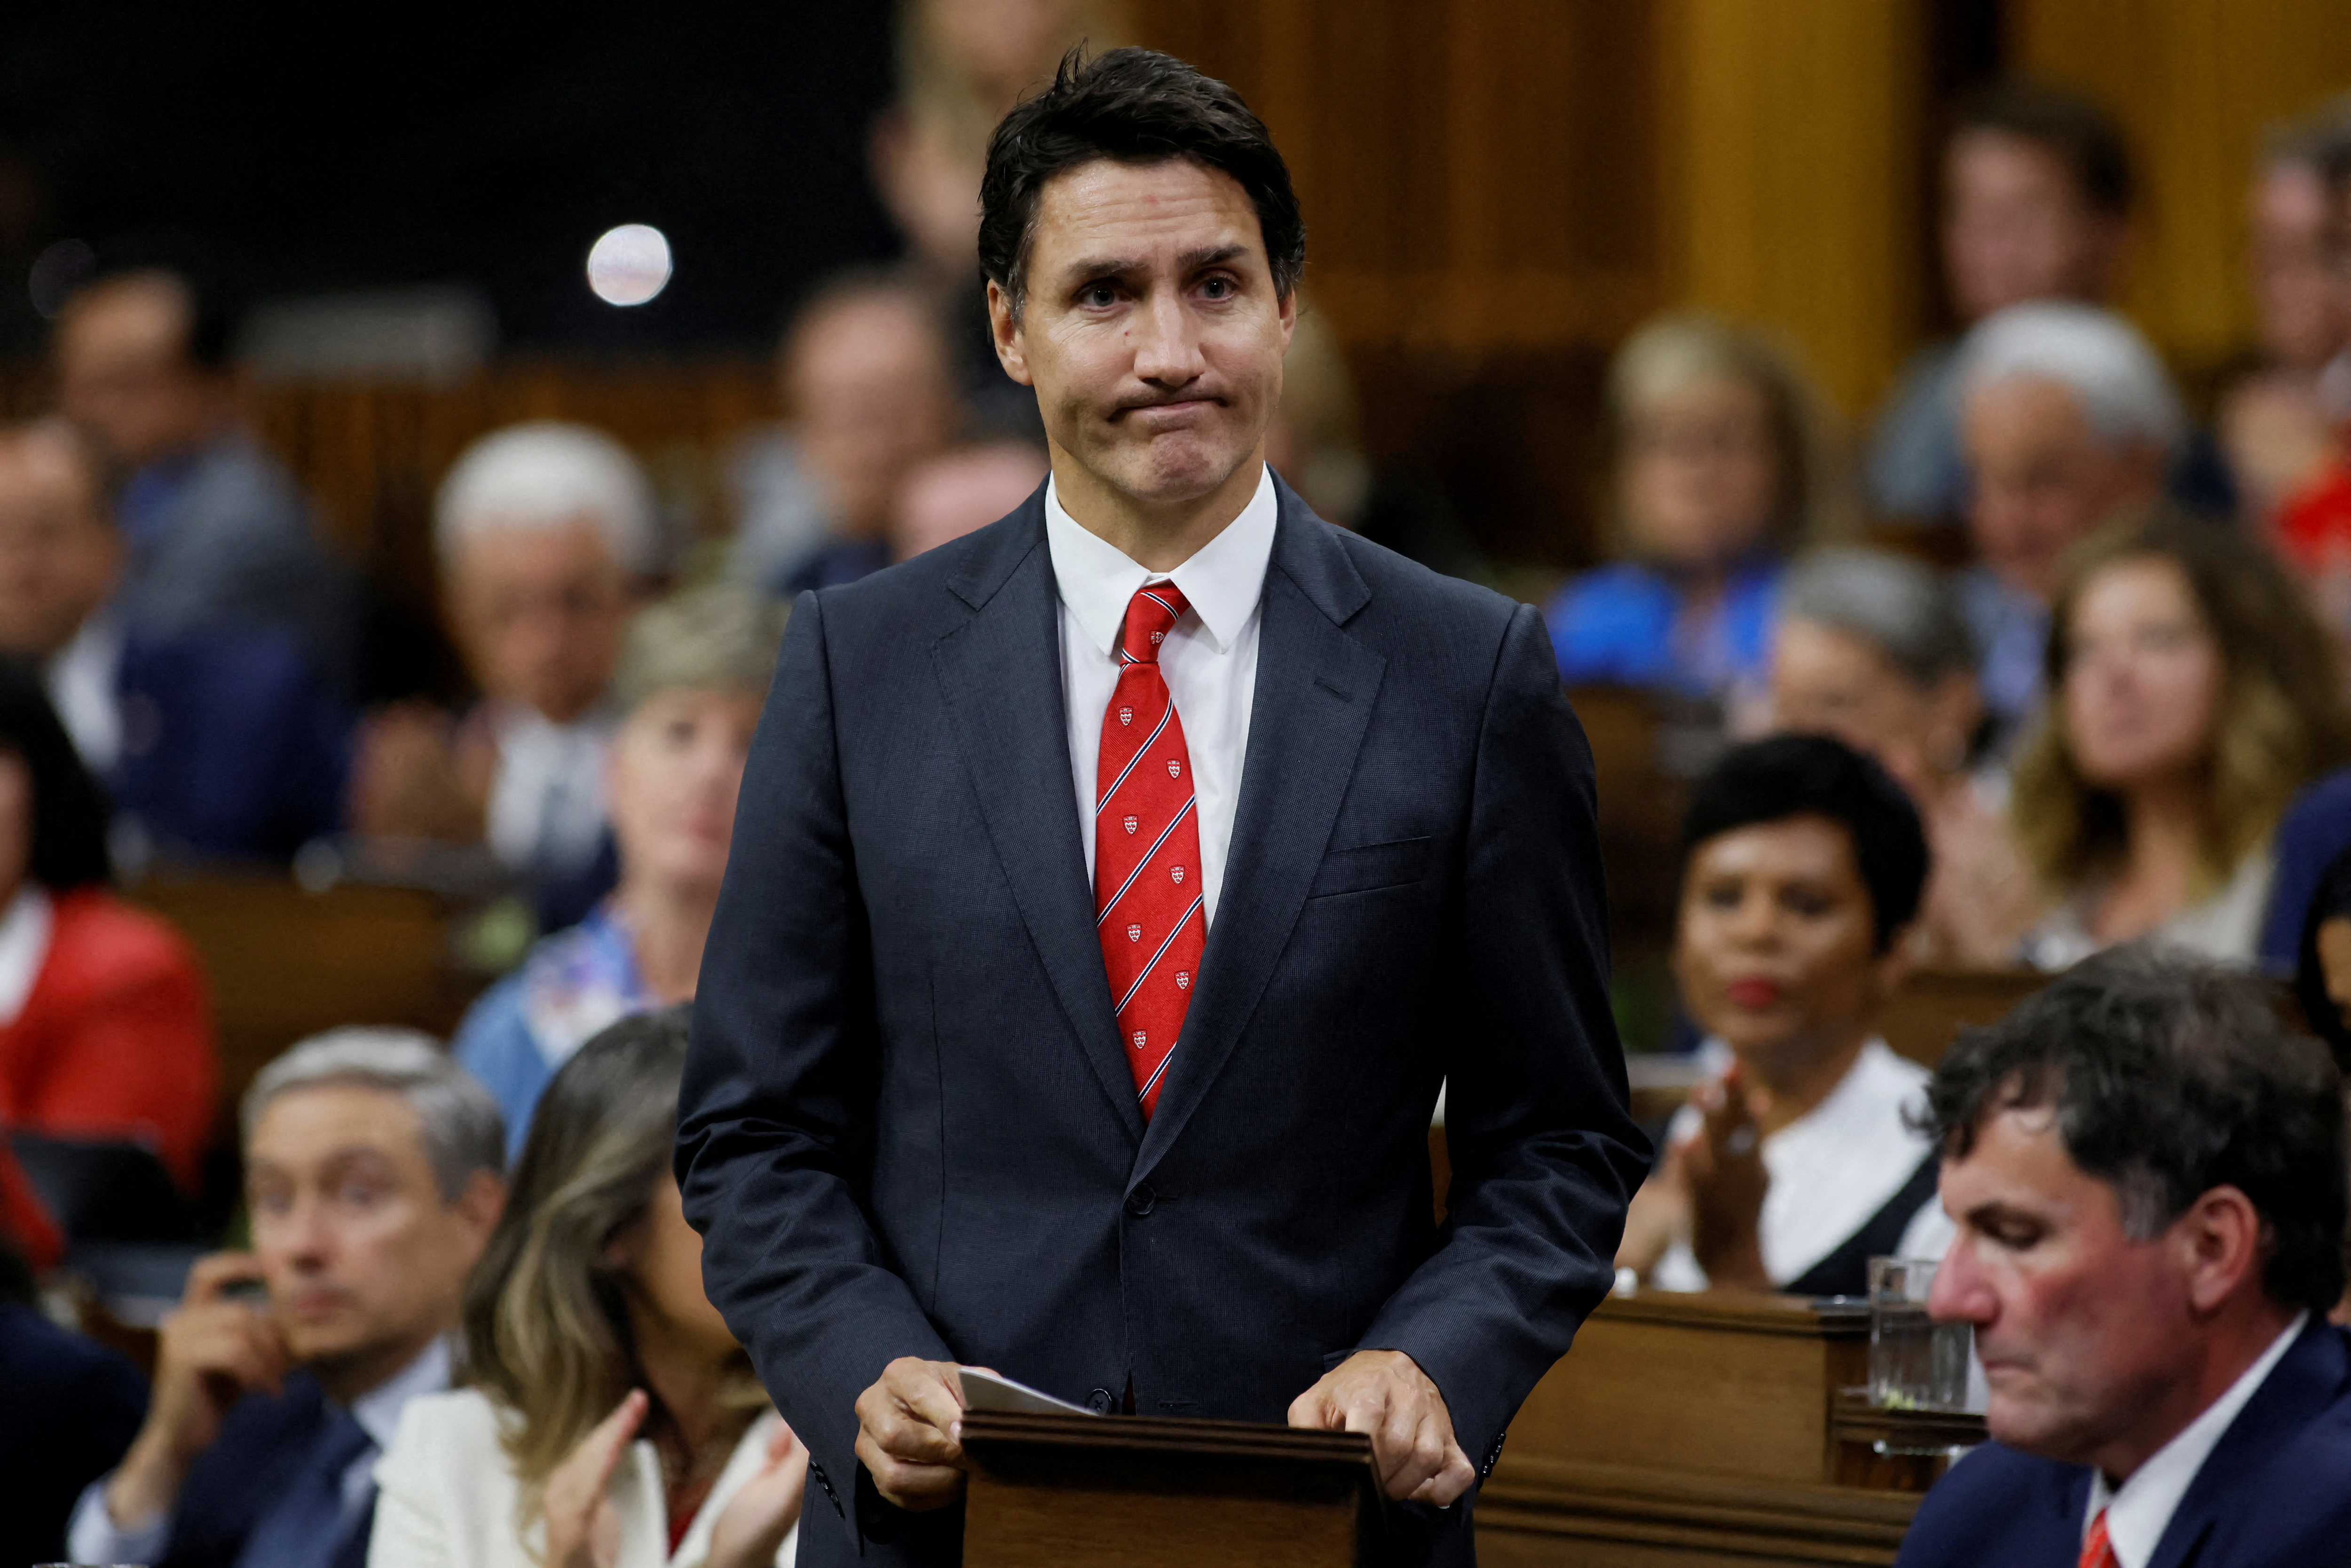 Canadian Prime Minister Justin Trudeau stands to make a statement in the House of Commons on Parliament Hill in Ottawa